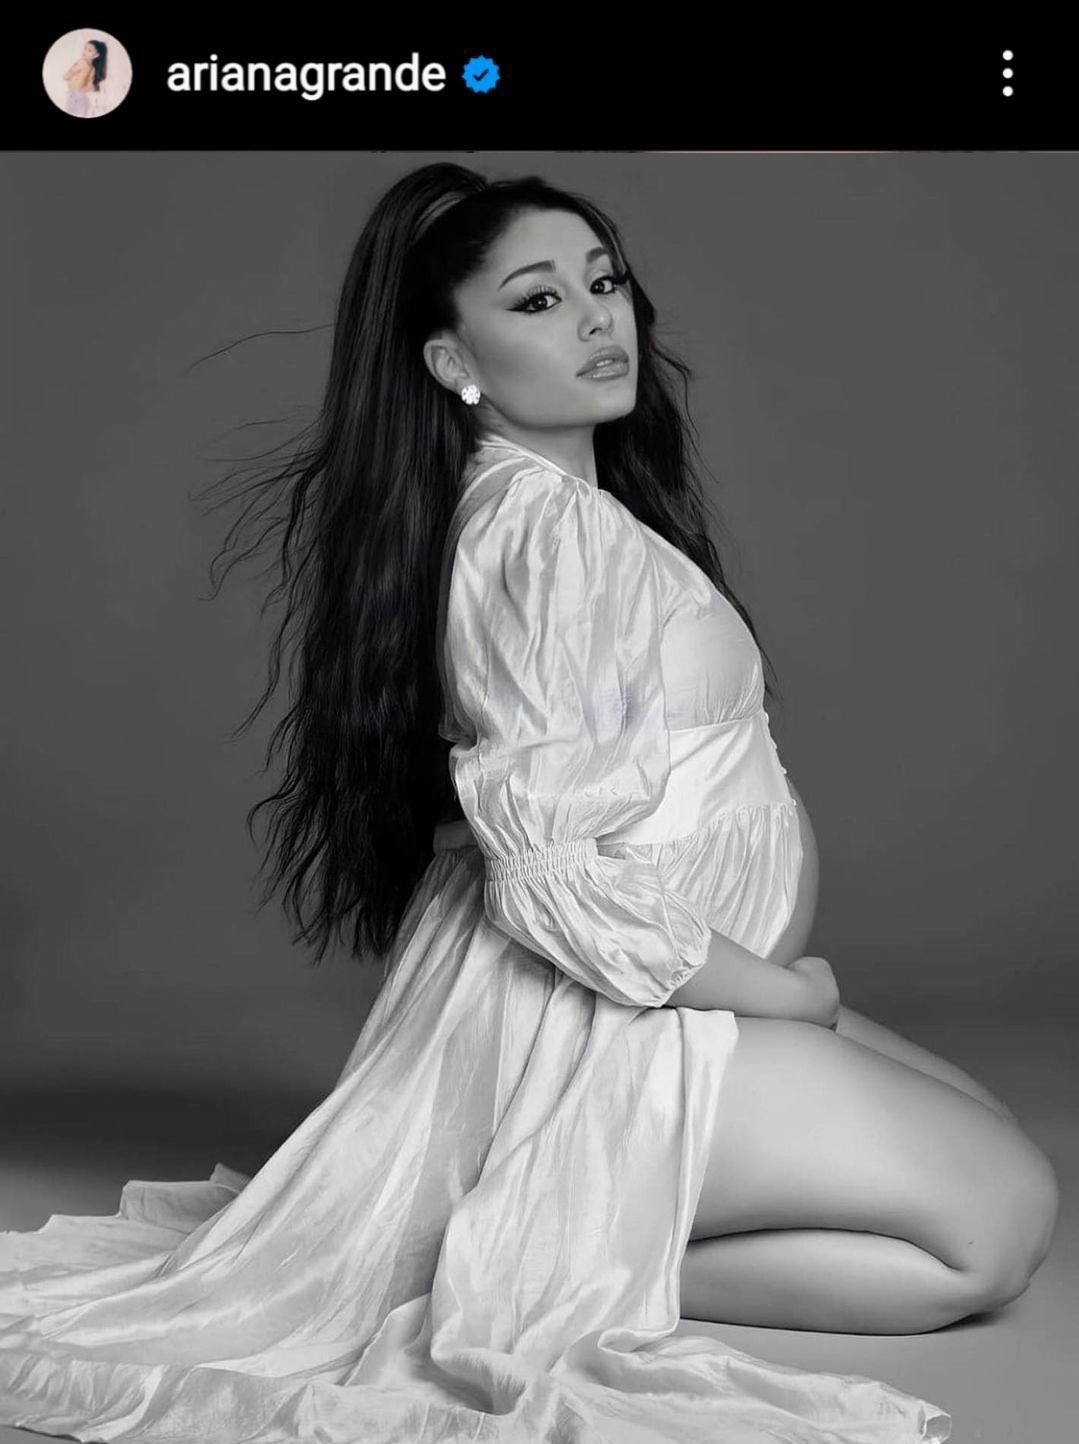 Collection Of Pregnancy Rumors: Is Ariana Grande Pregnant?